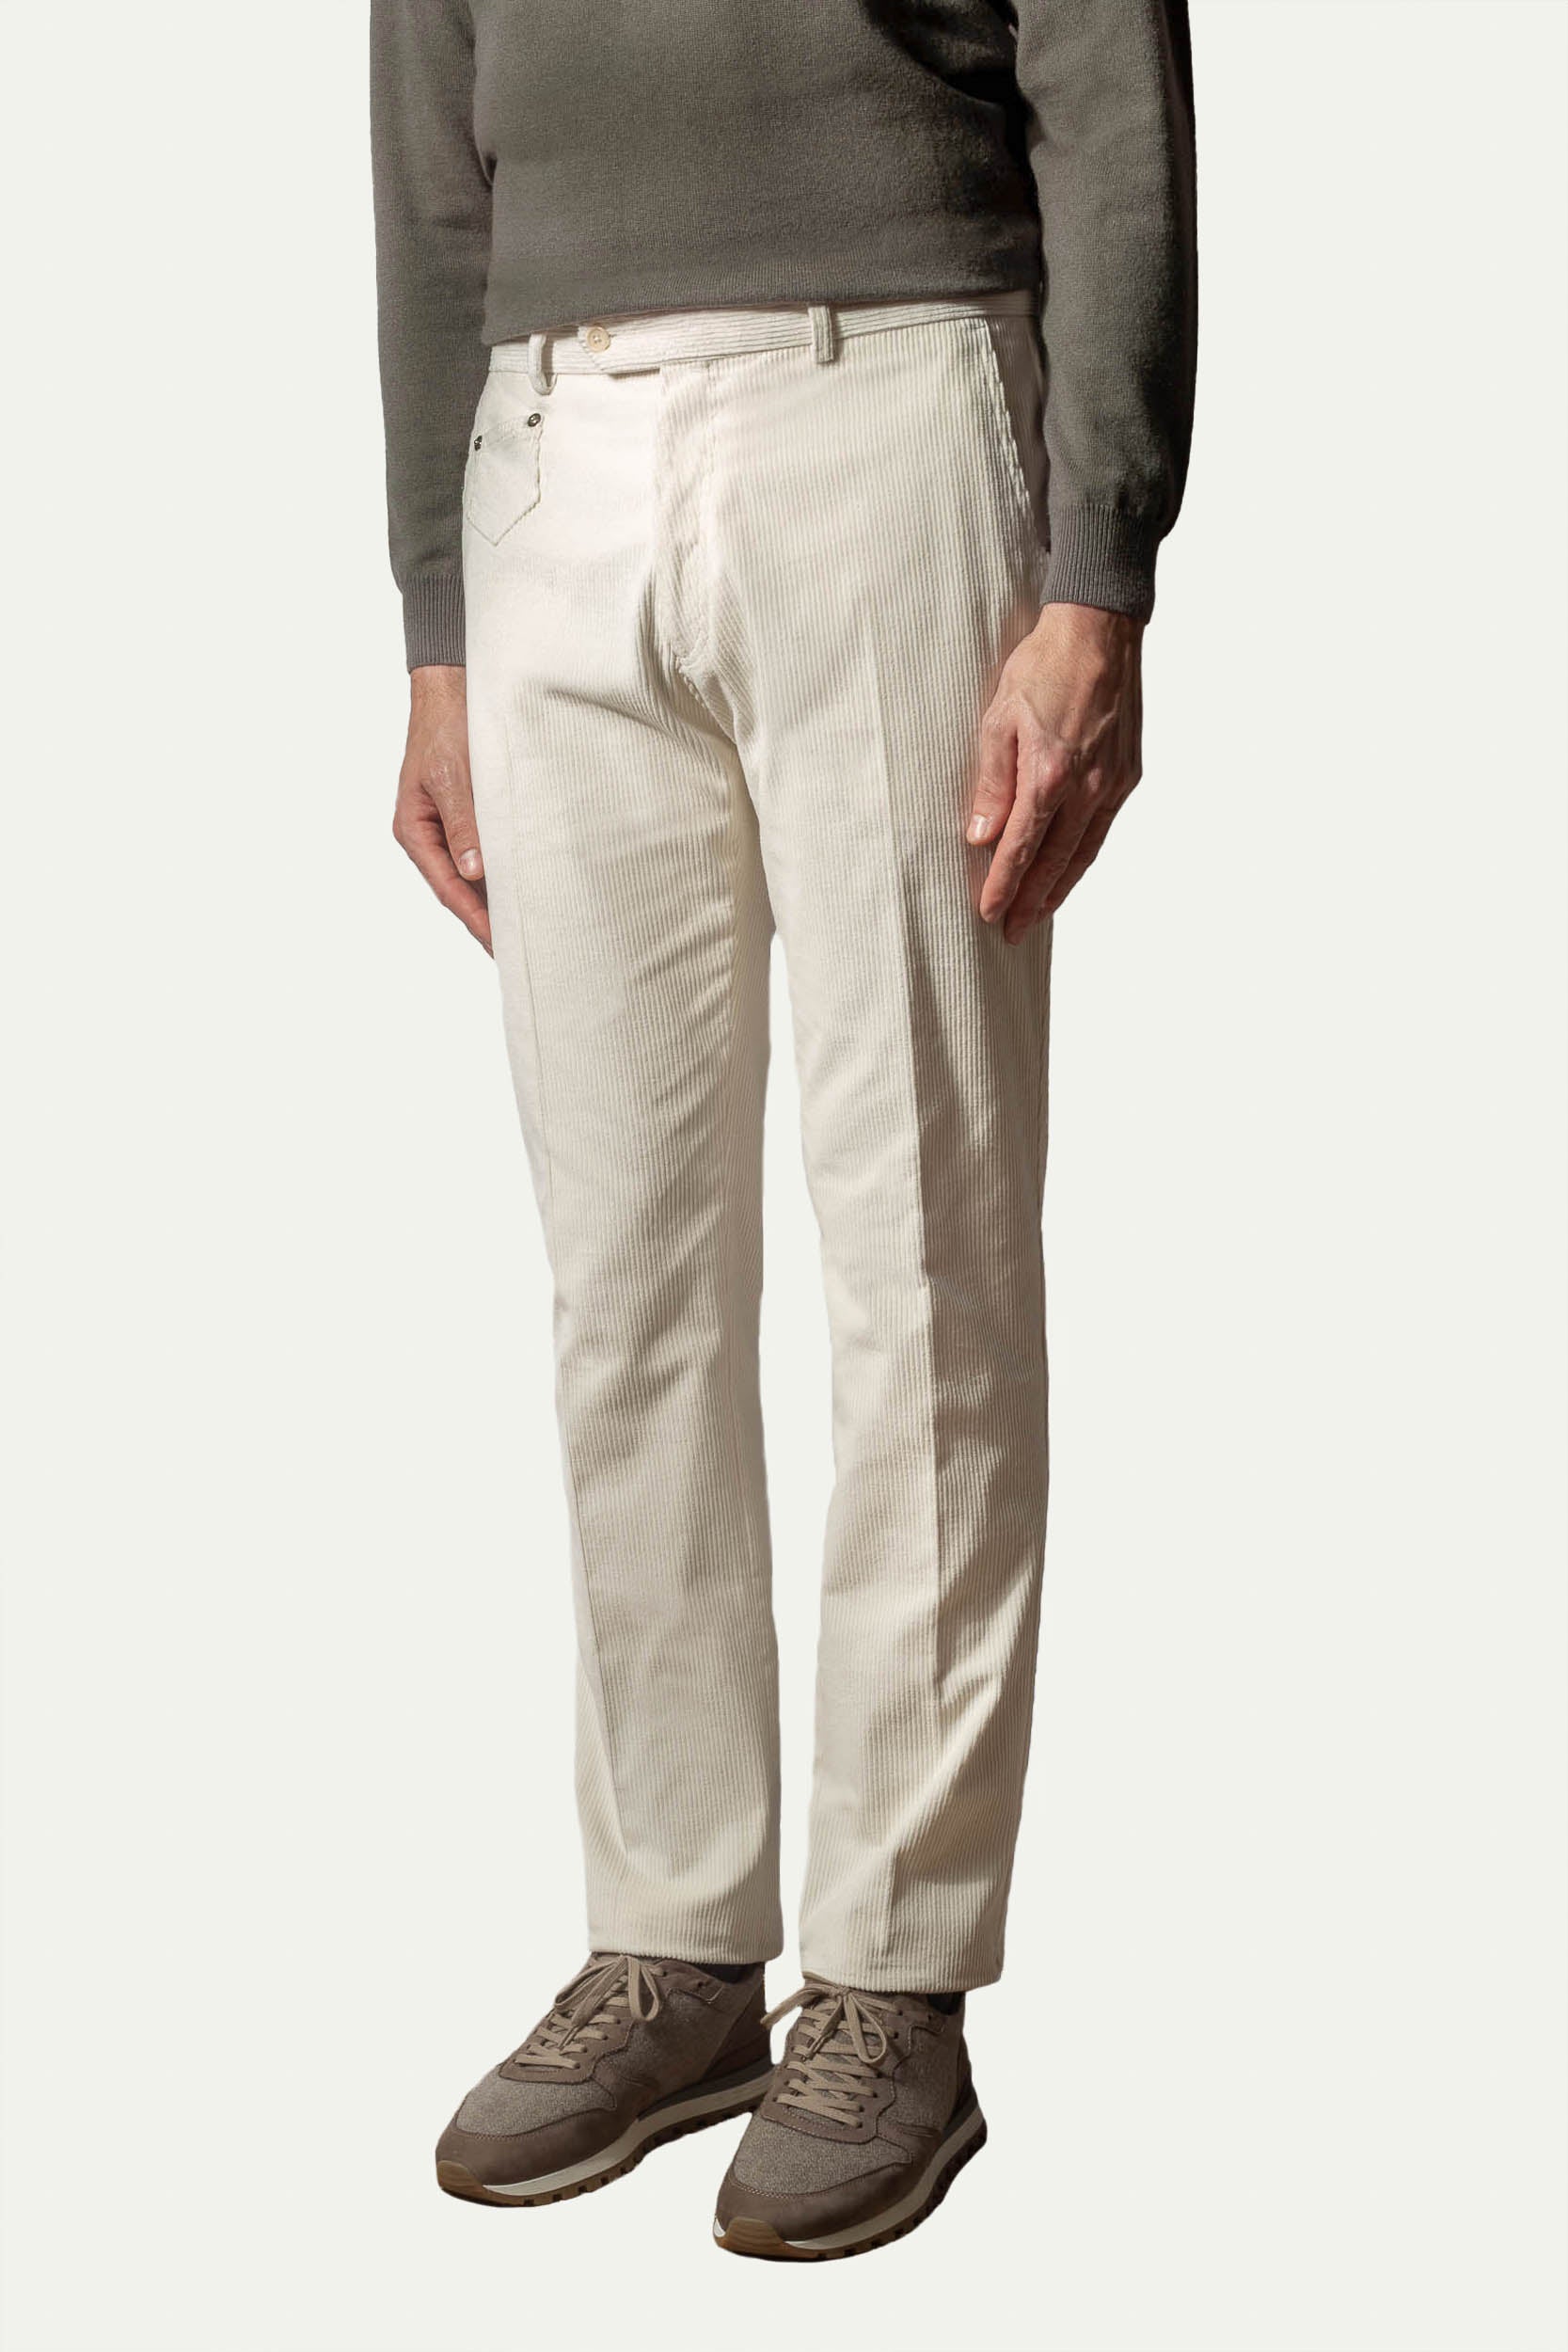 Corduroy Trousers - The Ben Silver Collection